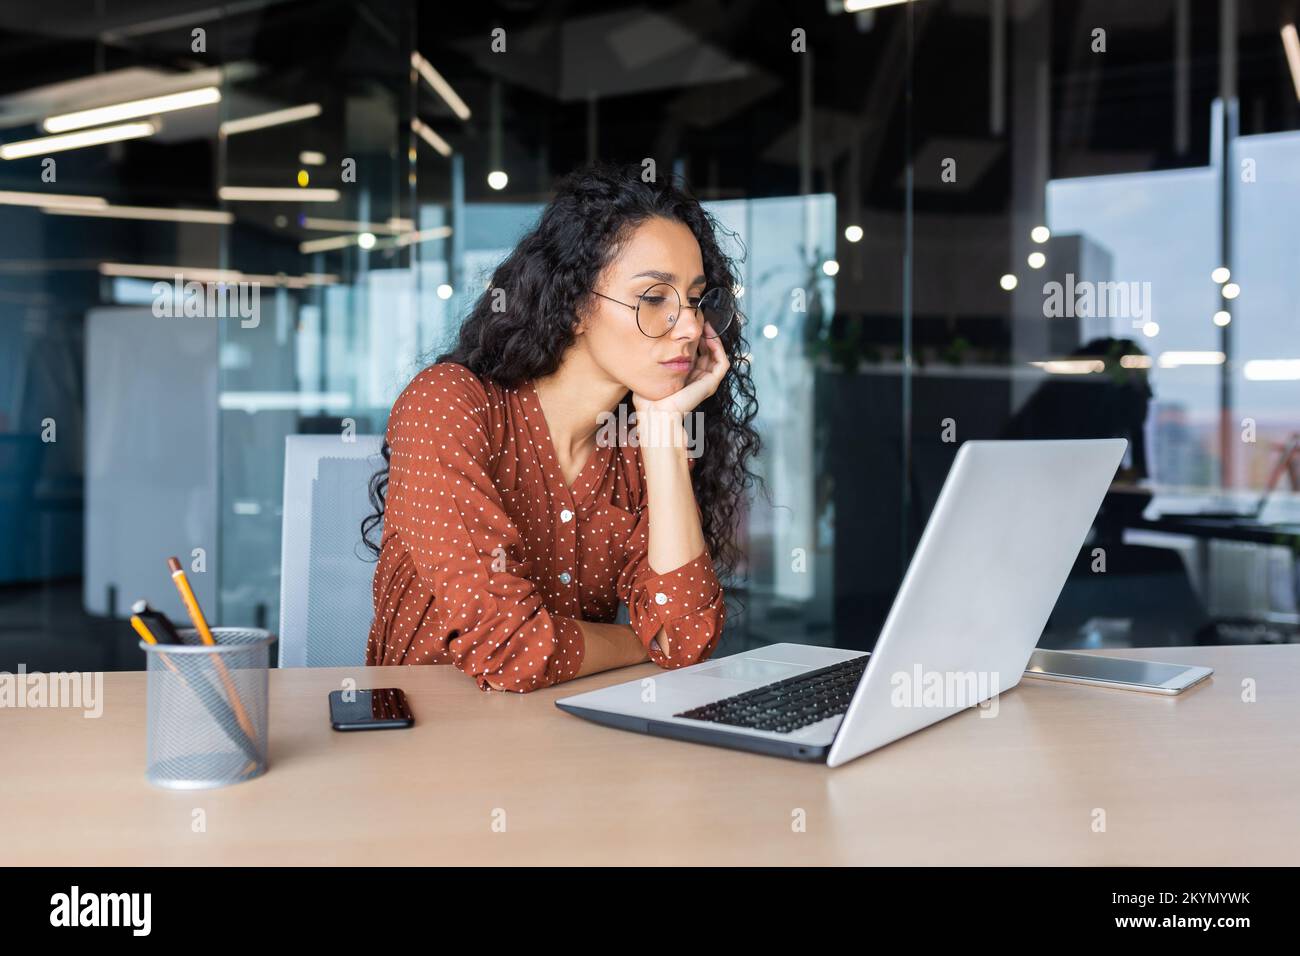 Sad grumpy Latin American woman working inside the office, business woman is bored looking at the laptop screen. Stock Photo